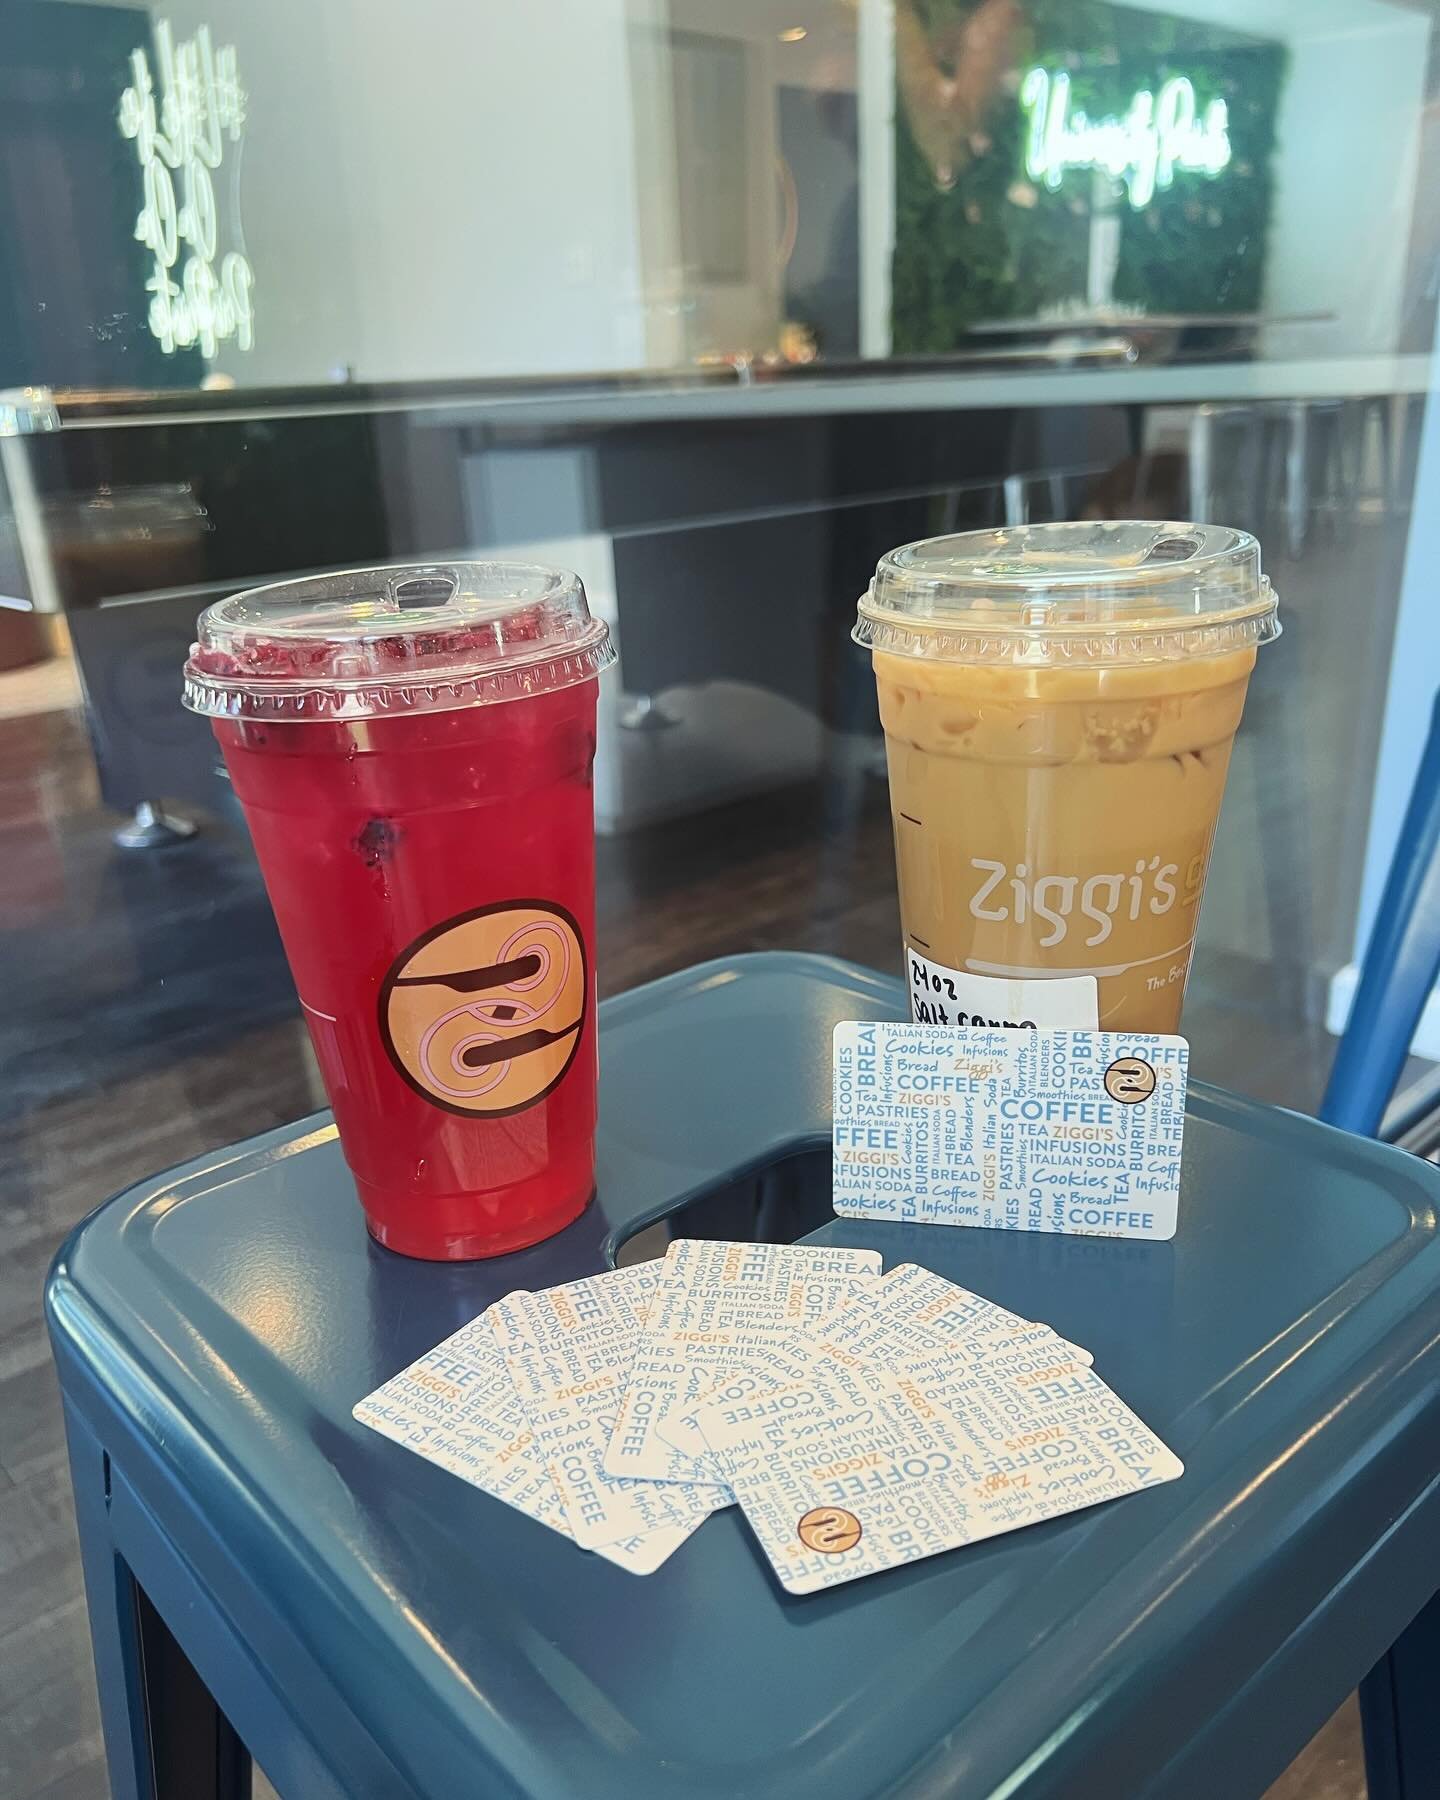 Hello and welcome to another episode of Thirsty Thursday ☕️!

Today we will be handing out $10 Gift Cards to @ziggis_coffee to the first 10 people who like and comment the answer to the following question:

Which brew method doesn&rsquo;t require any